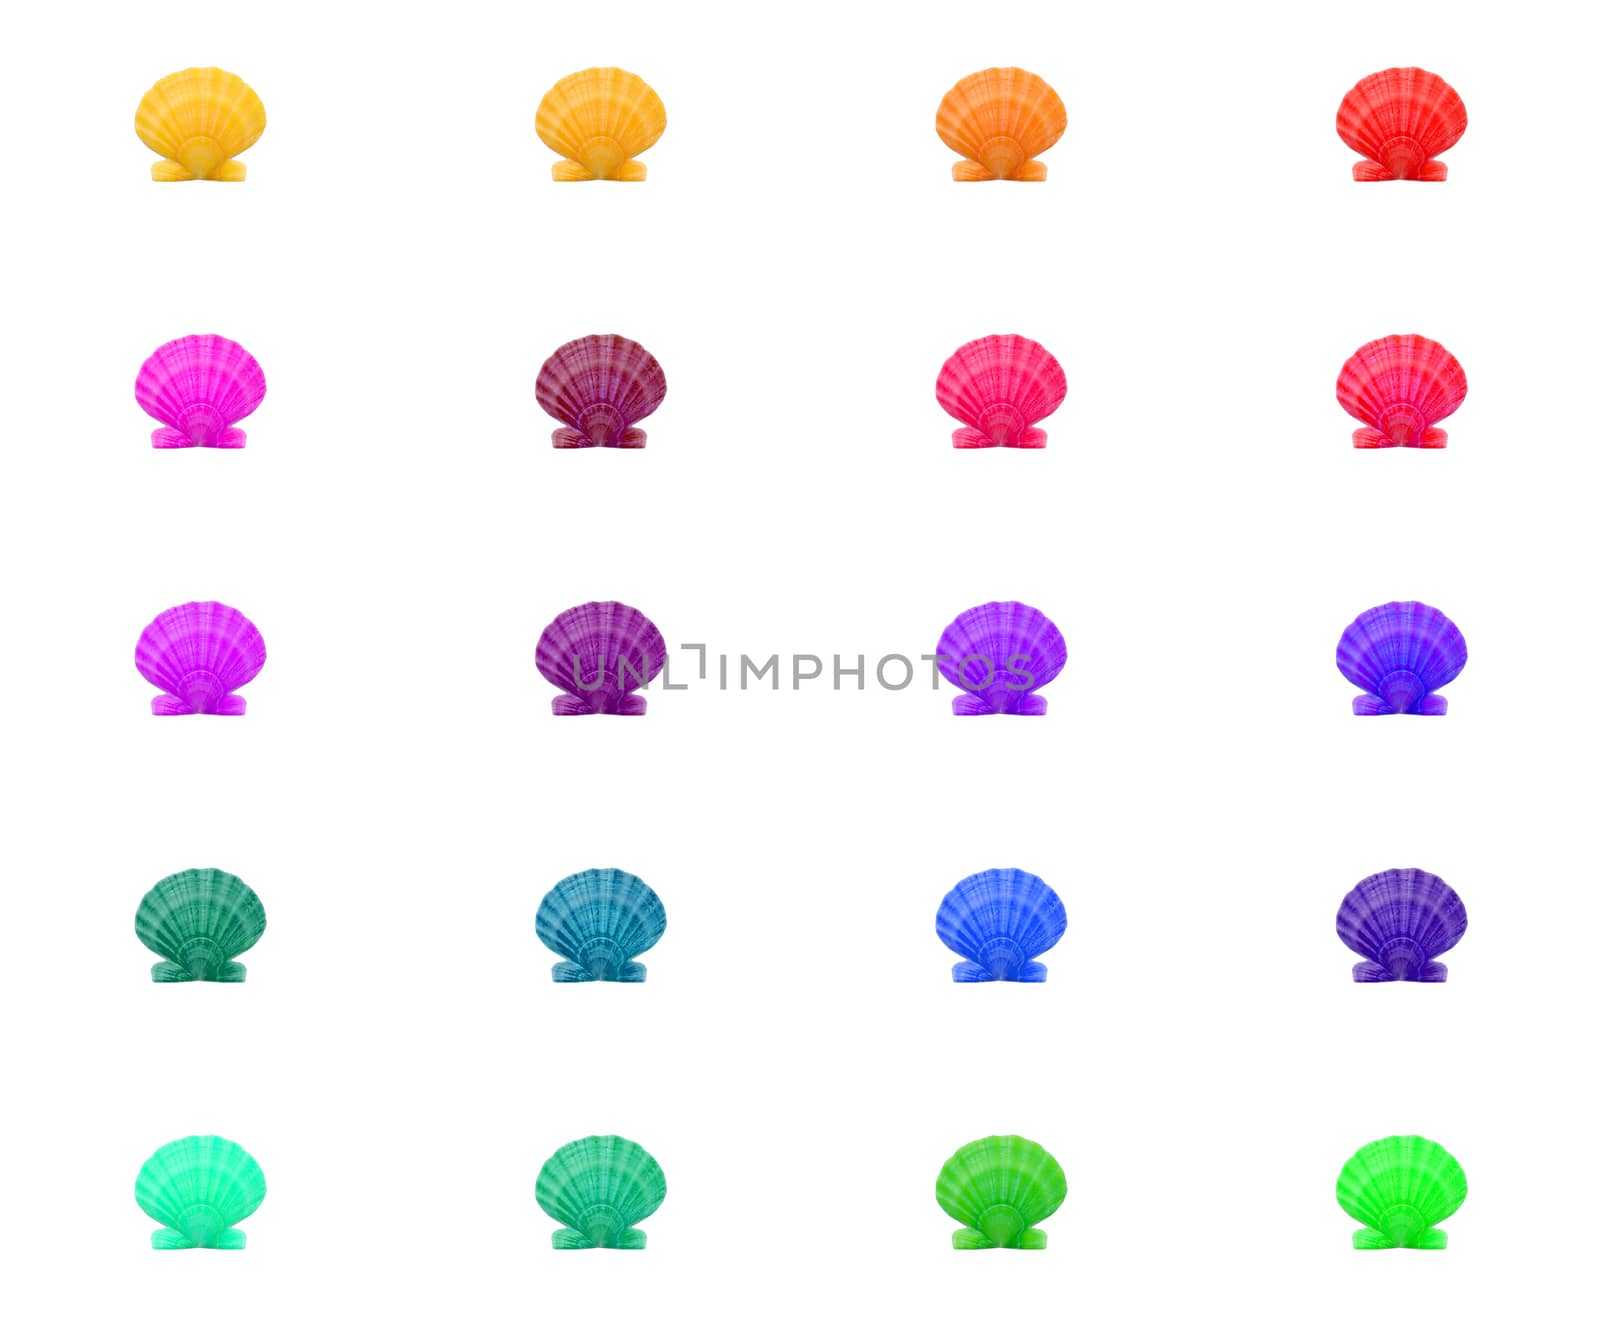 Bright colorful pattern background of multicolred rainbow shells in grid